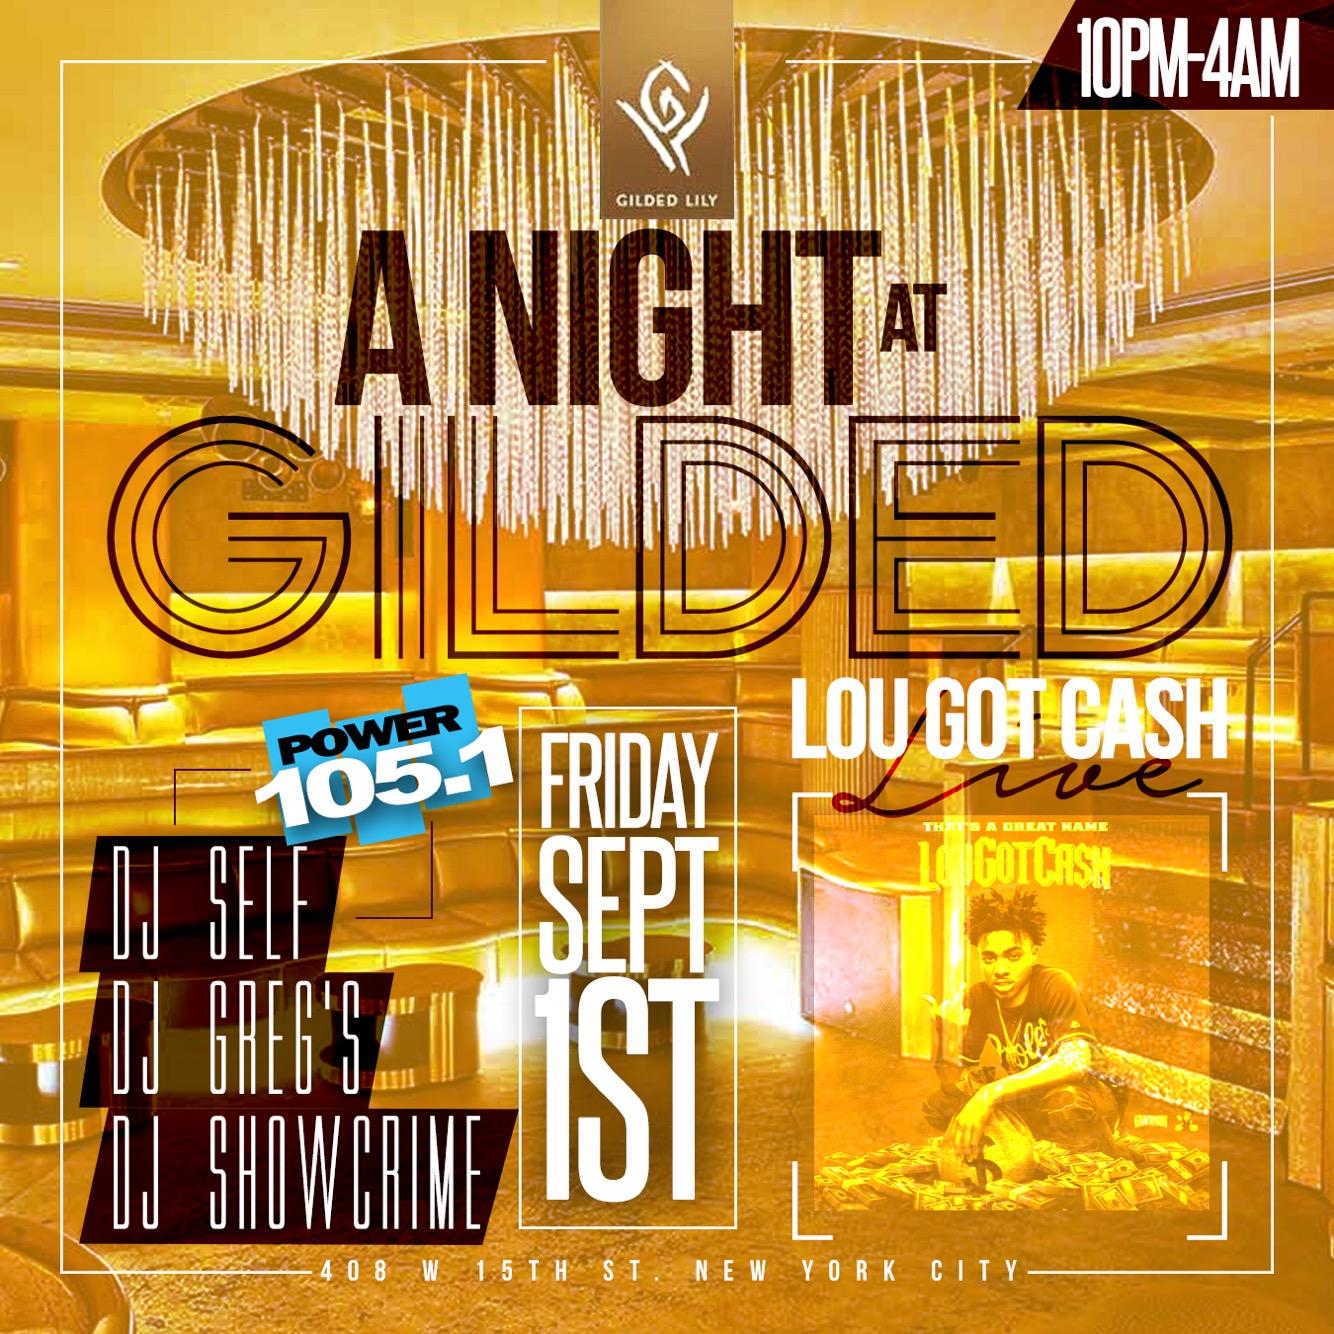 Lou Got Cash at Gilded Lily 9/1